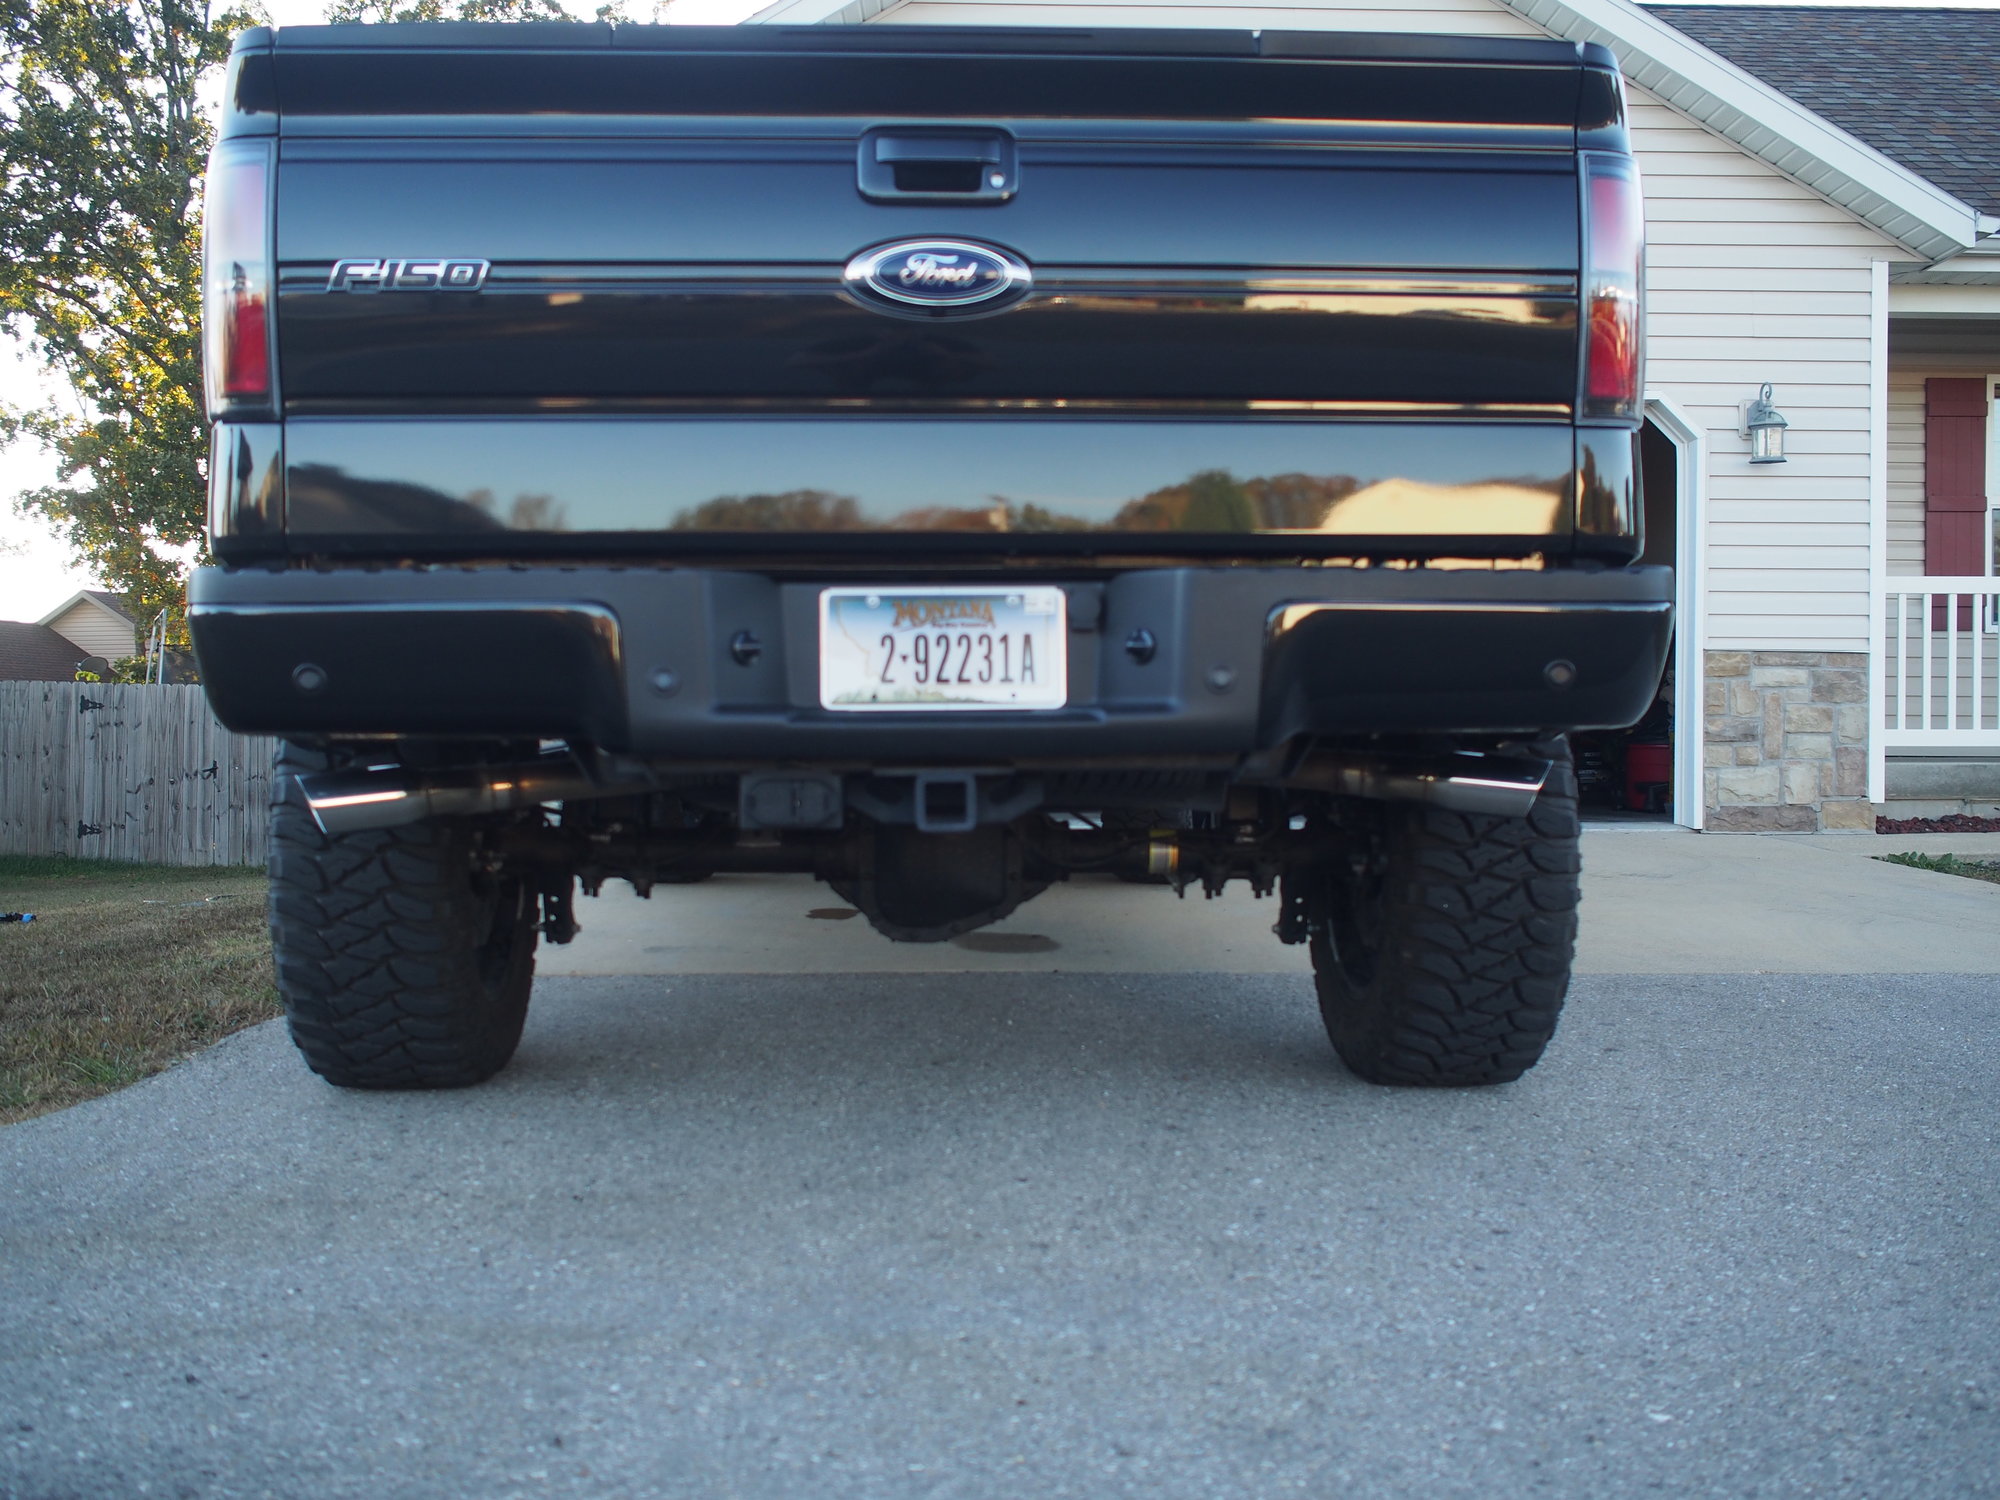 Ford F150 With Dual Exhaust